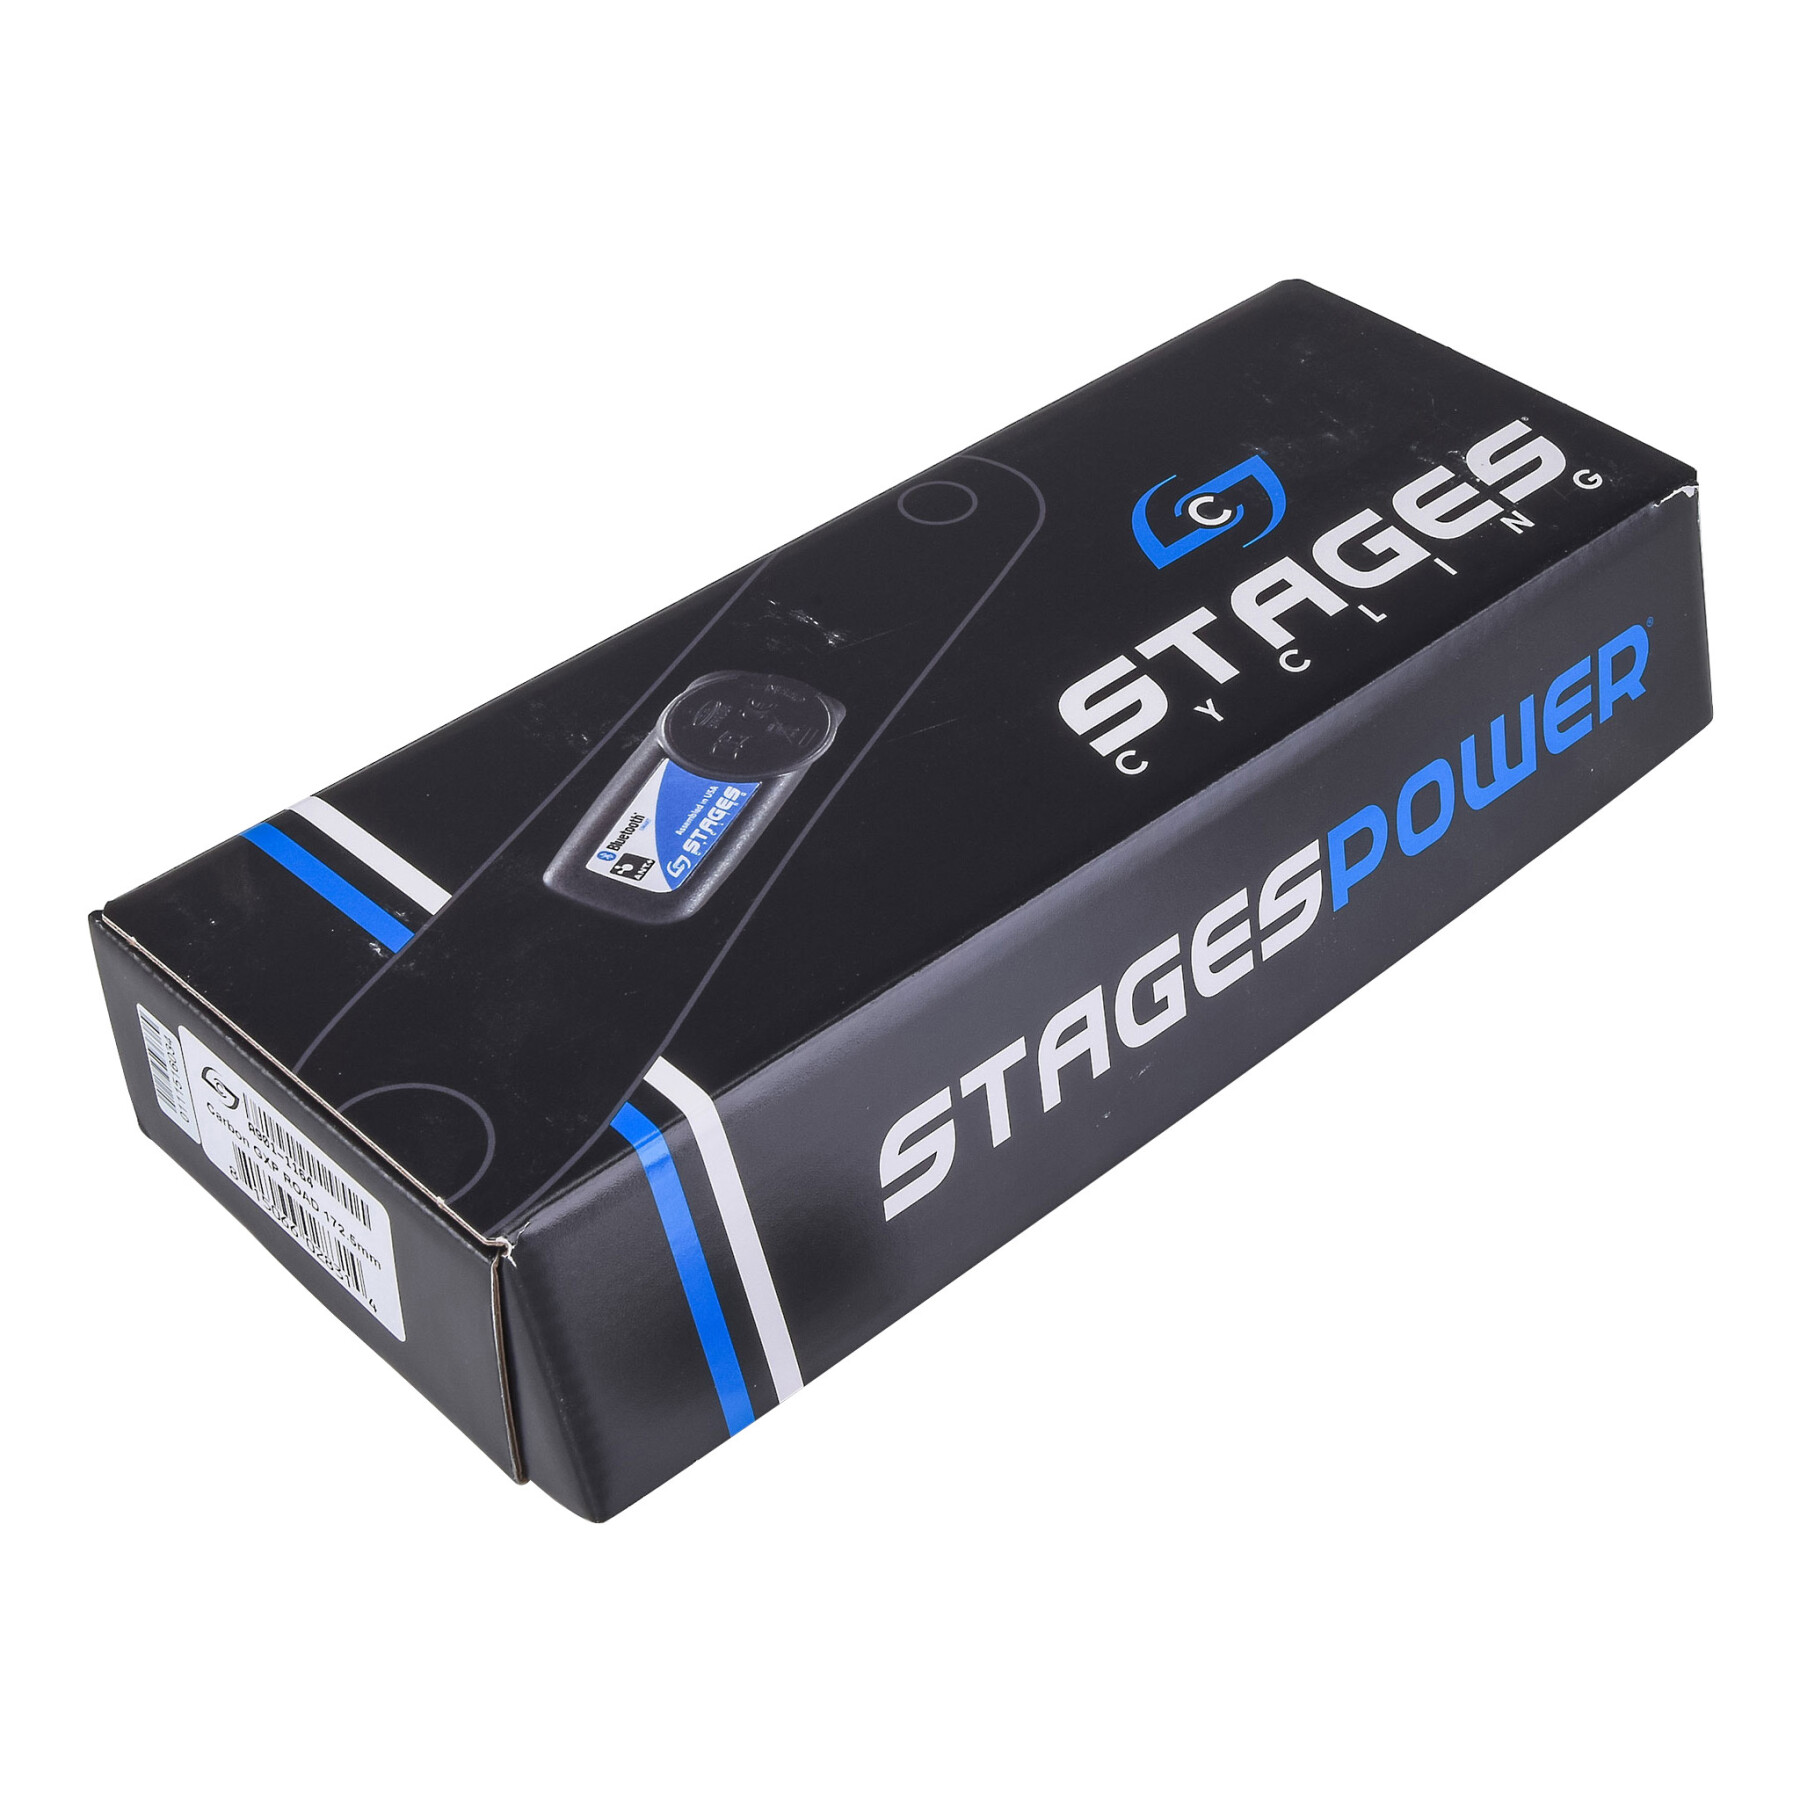 Cranks Stages Cycling Stages Power L - Stages Carbon for SRAM GXP Road